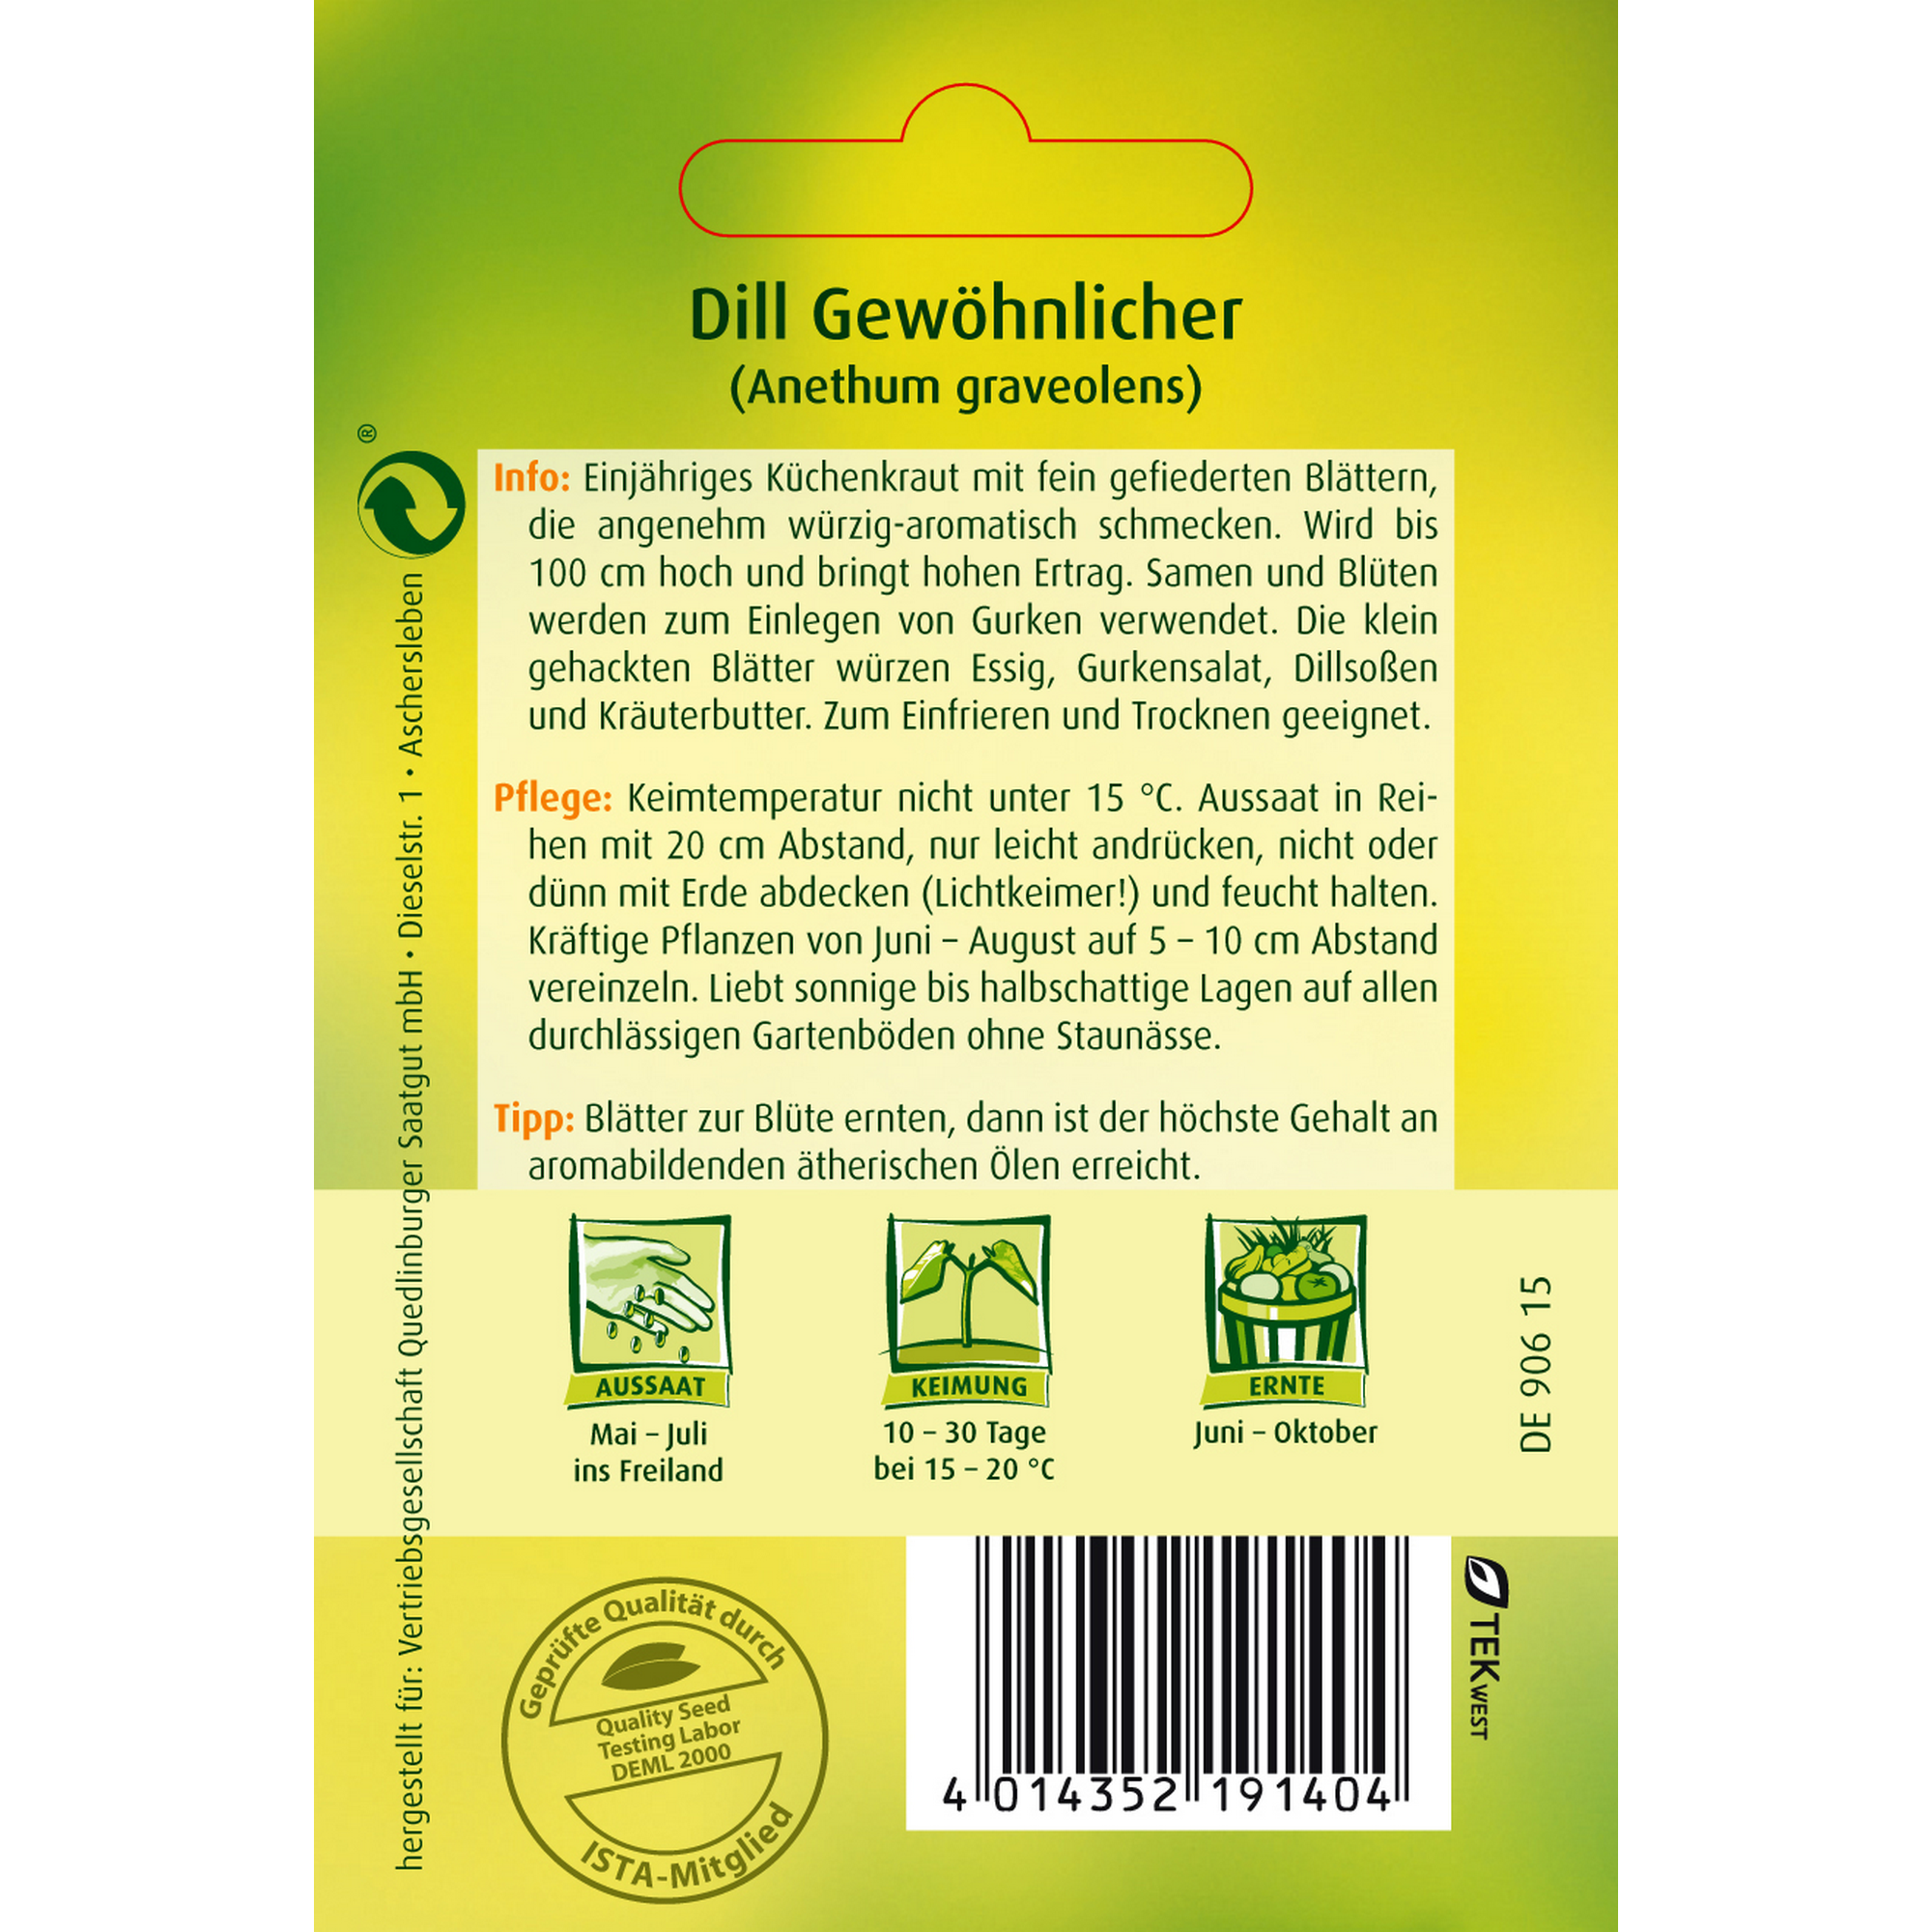 Gewöhnlicher Dill + product picture